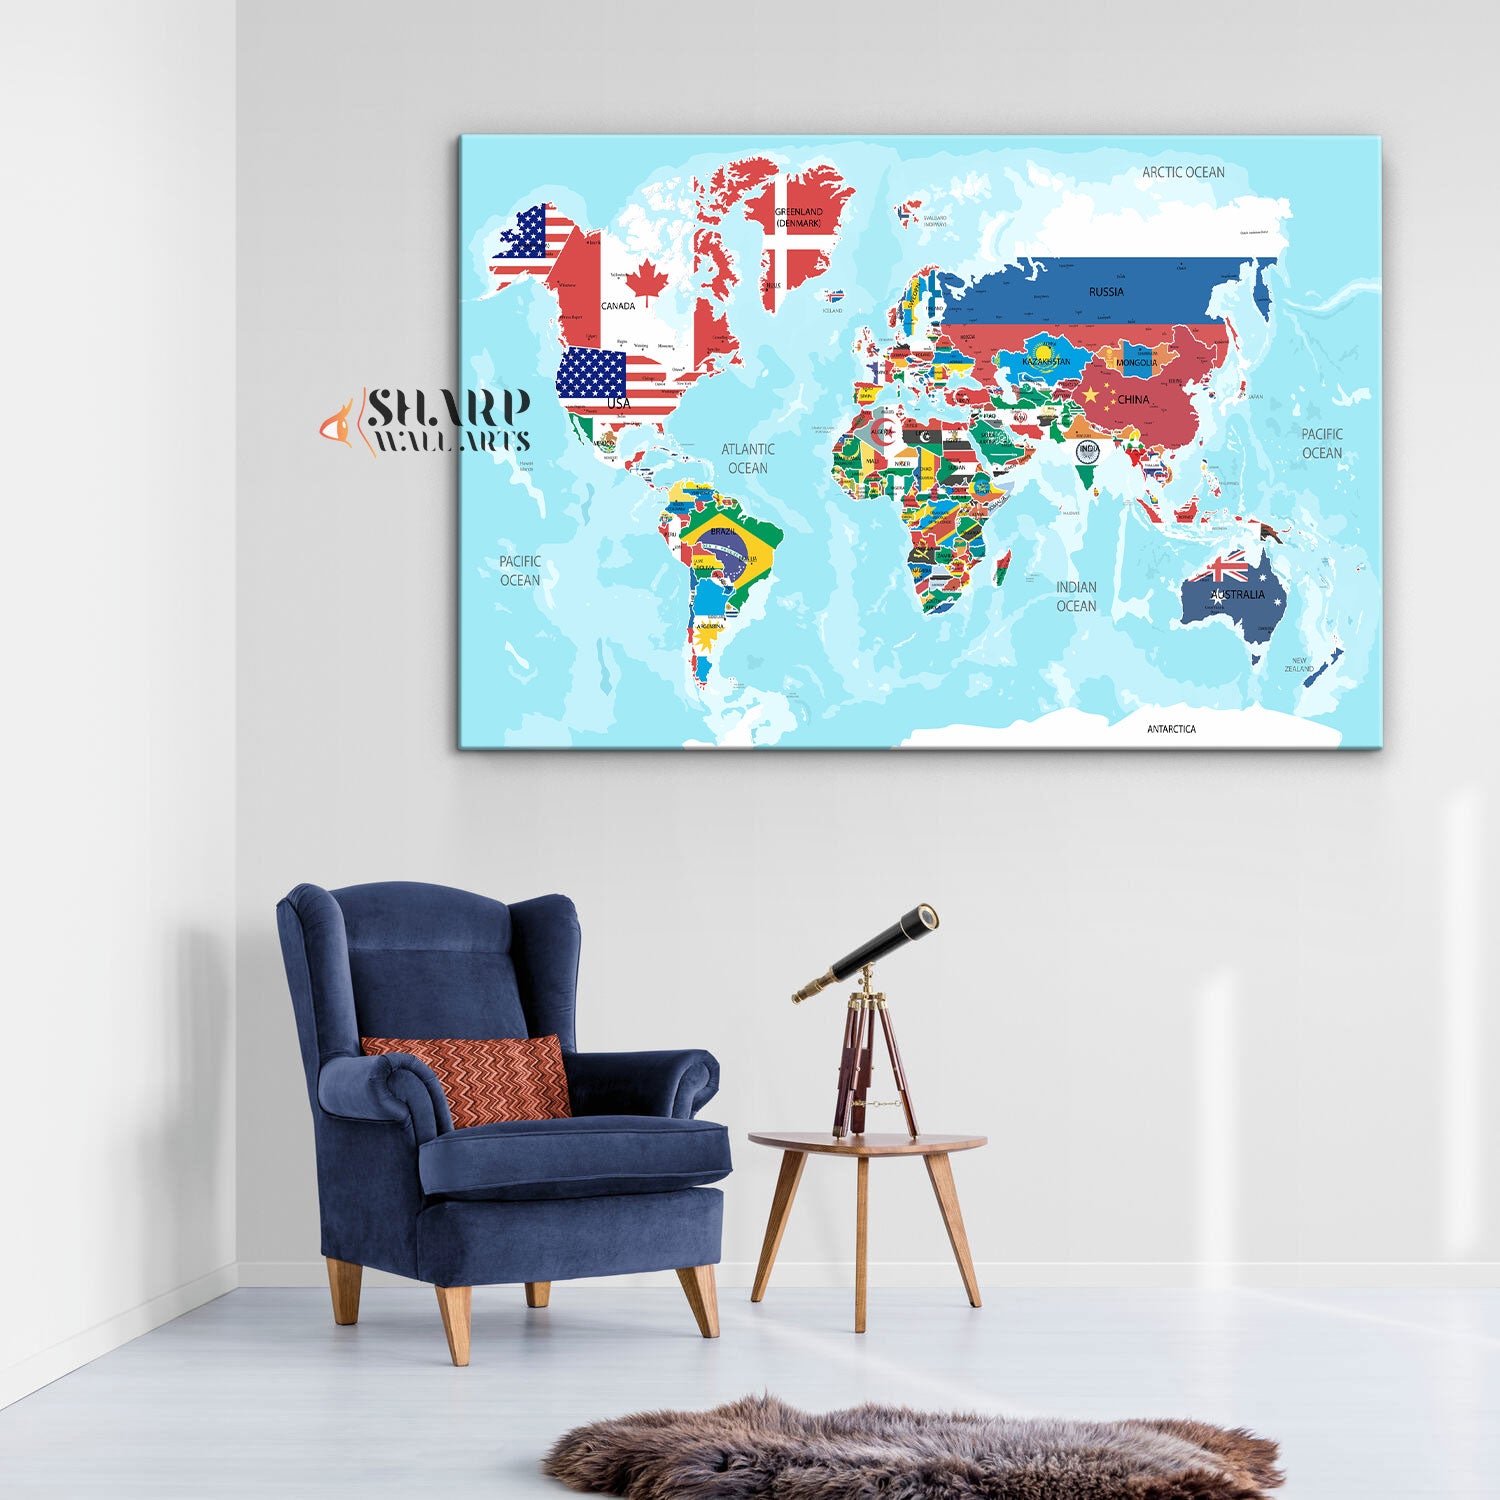 World Map Large Canvas With Countries - Living Room Wall Decor